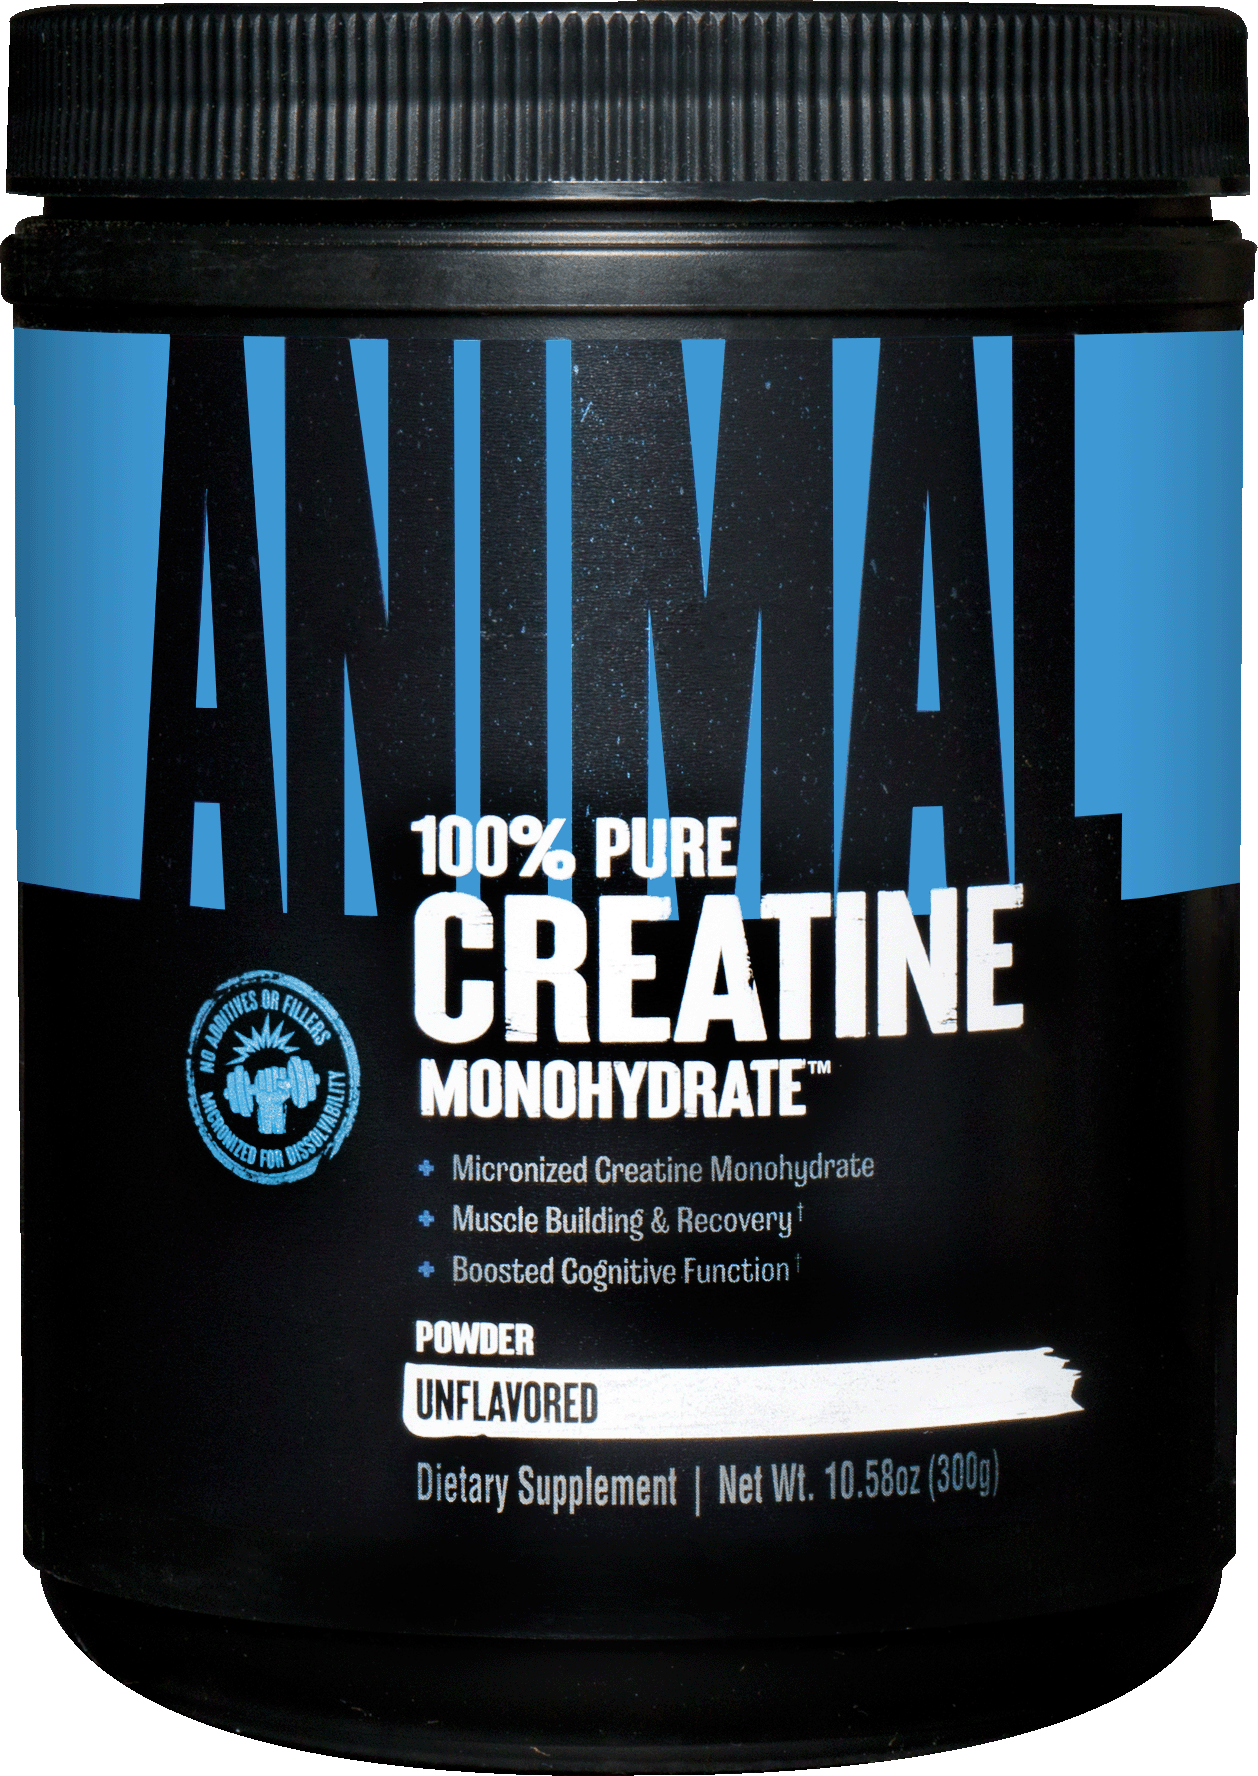 https://www.priceplow.com/static/images/products/universal-animal-micronized-creatine.png